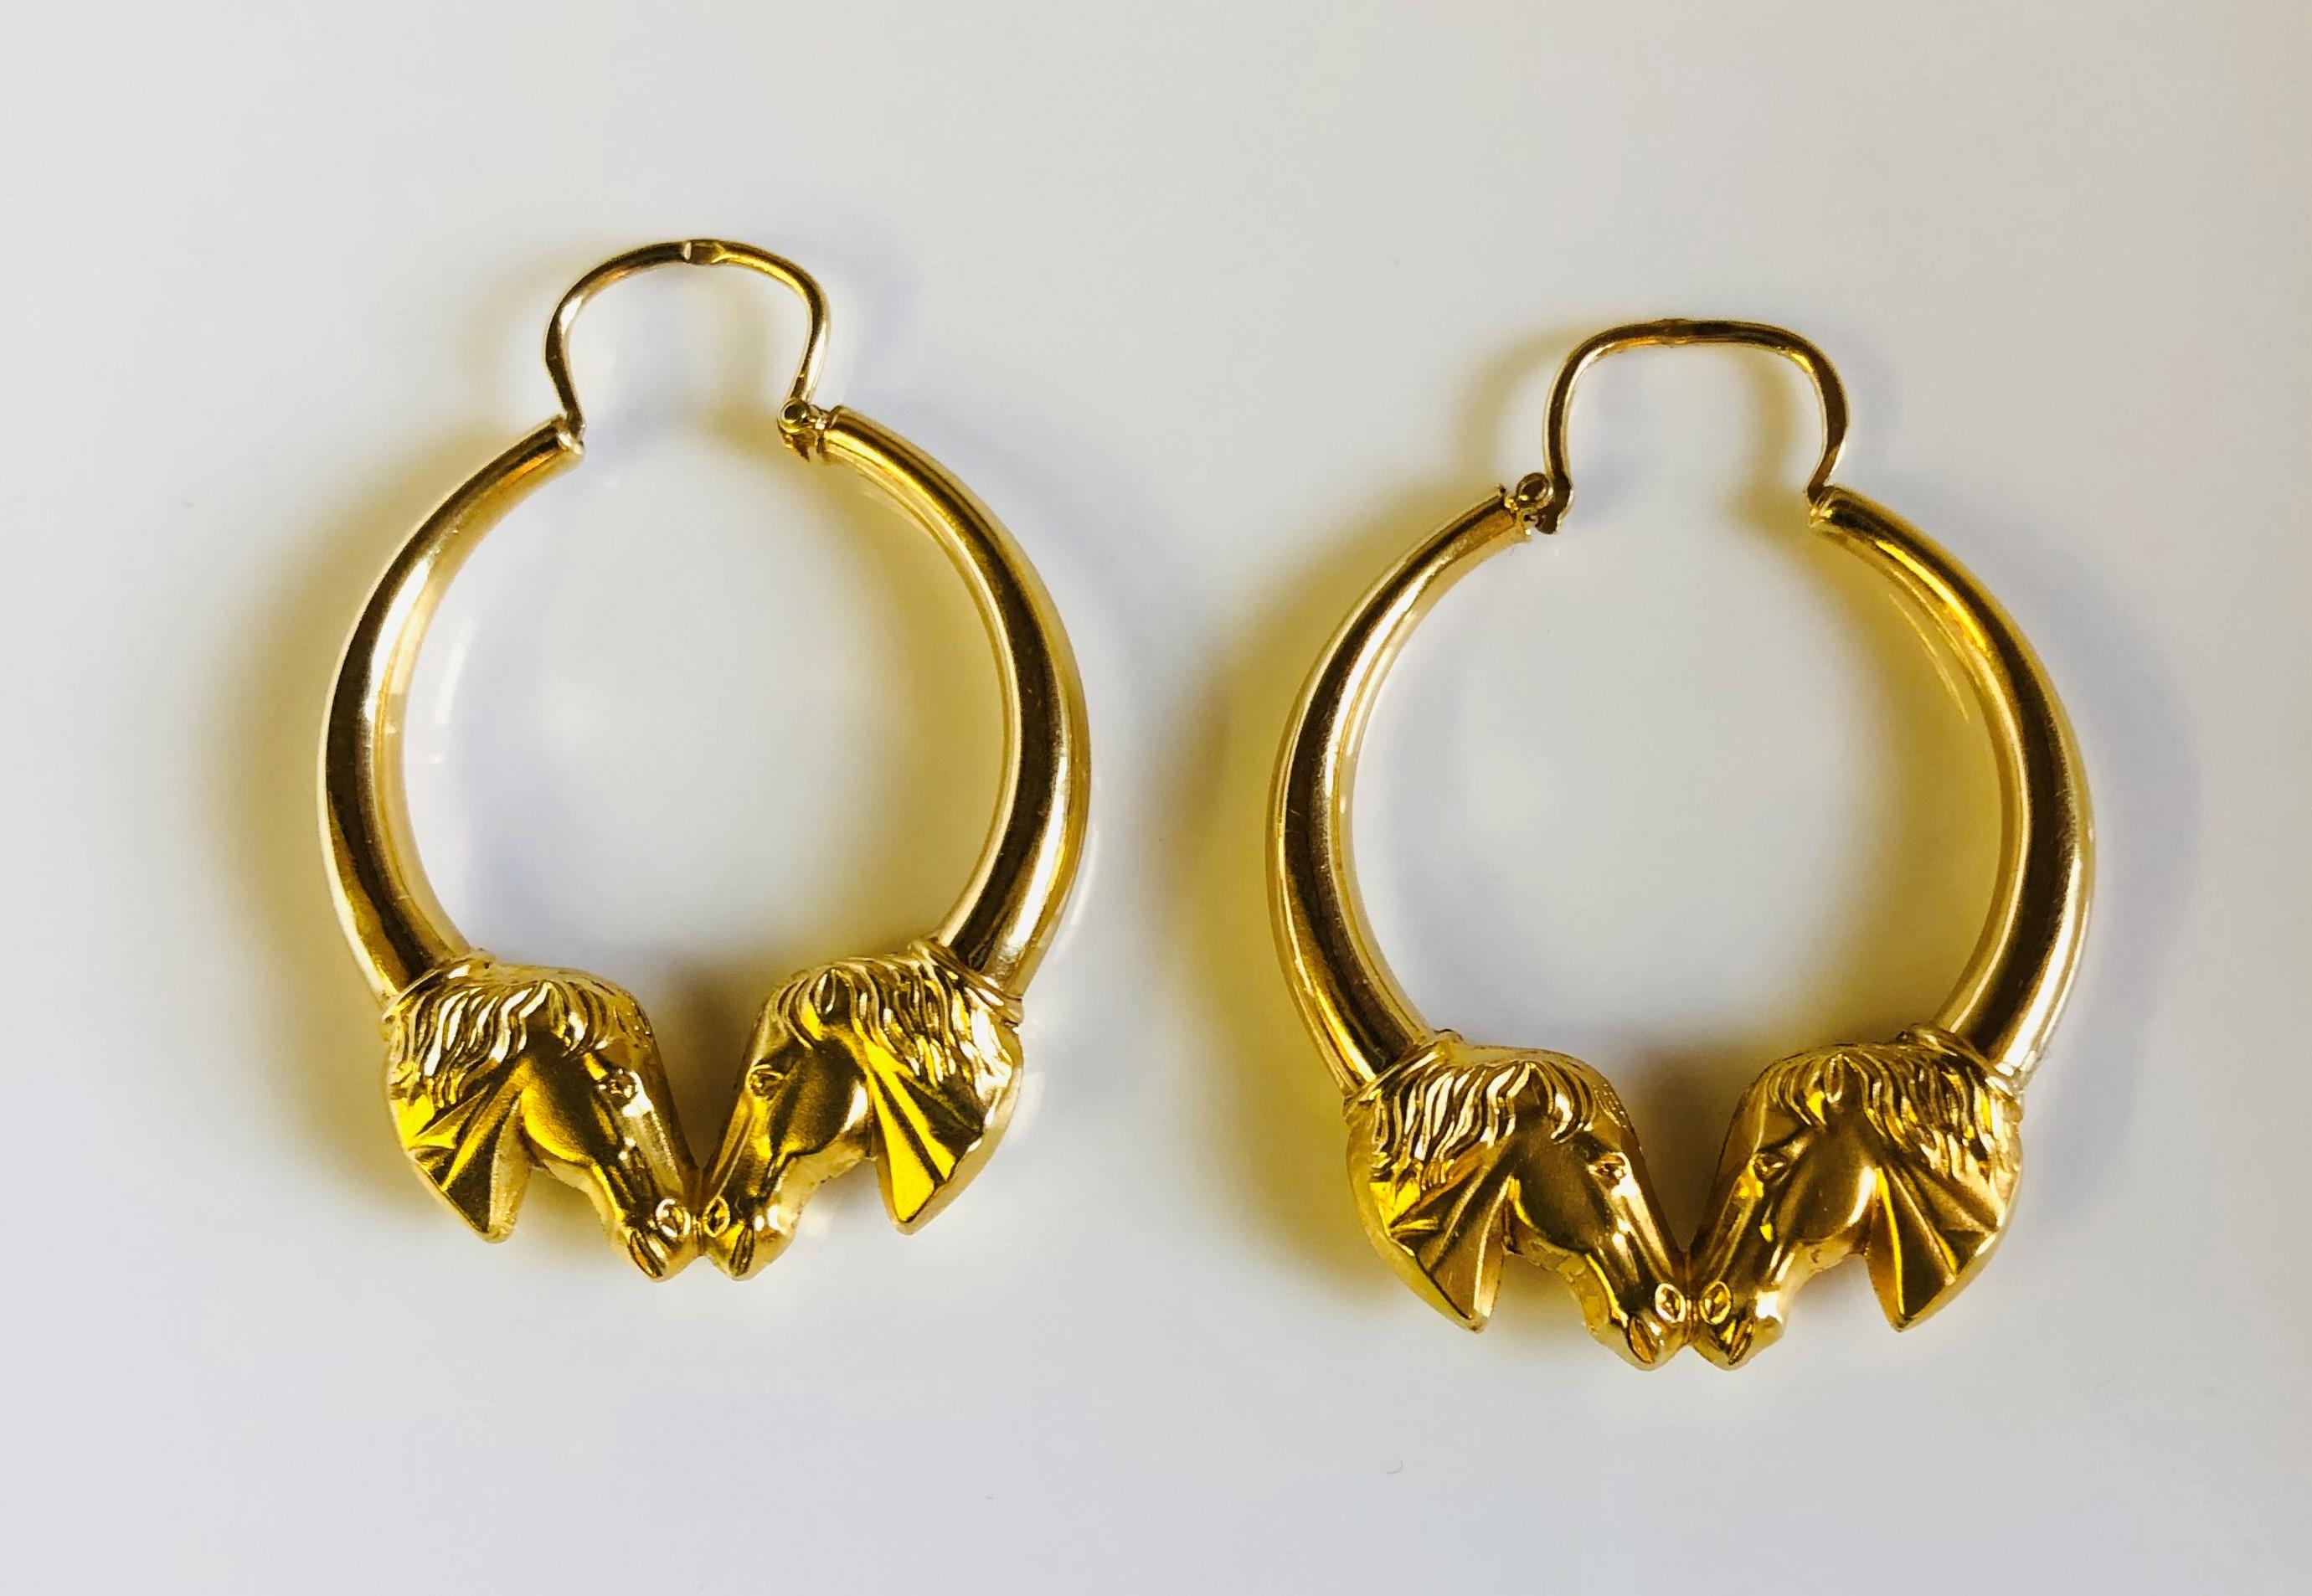 These are great for the equestrian in your life!
18 Karat Yellow Gold Hoop Earrings
Lightweight and very easy to wear!
Approximately 33mm x 26mm X 4mm
Ear Wire Clasp